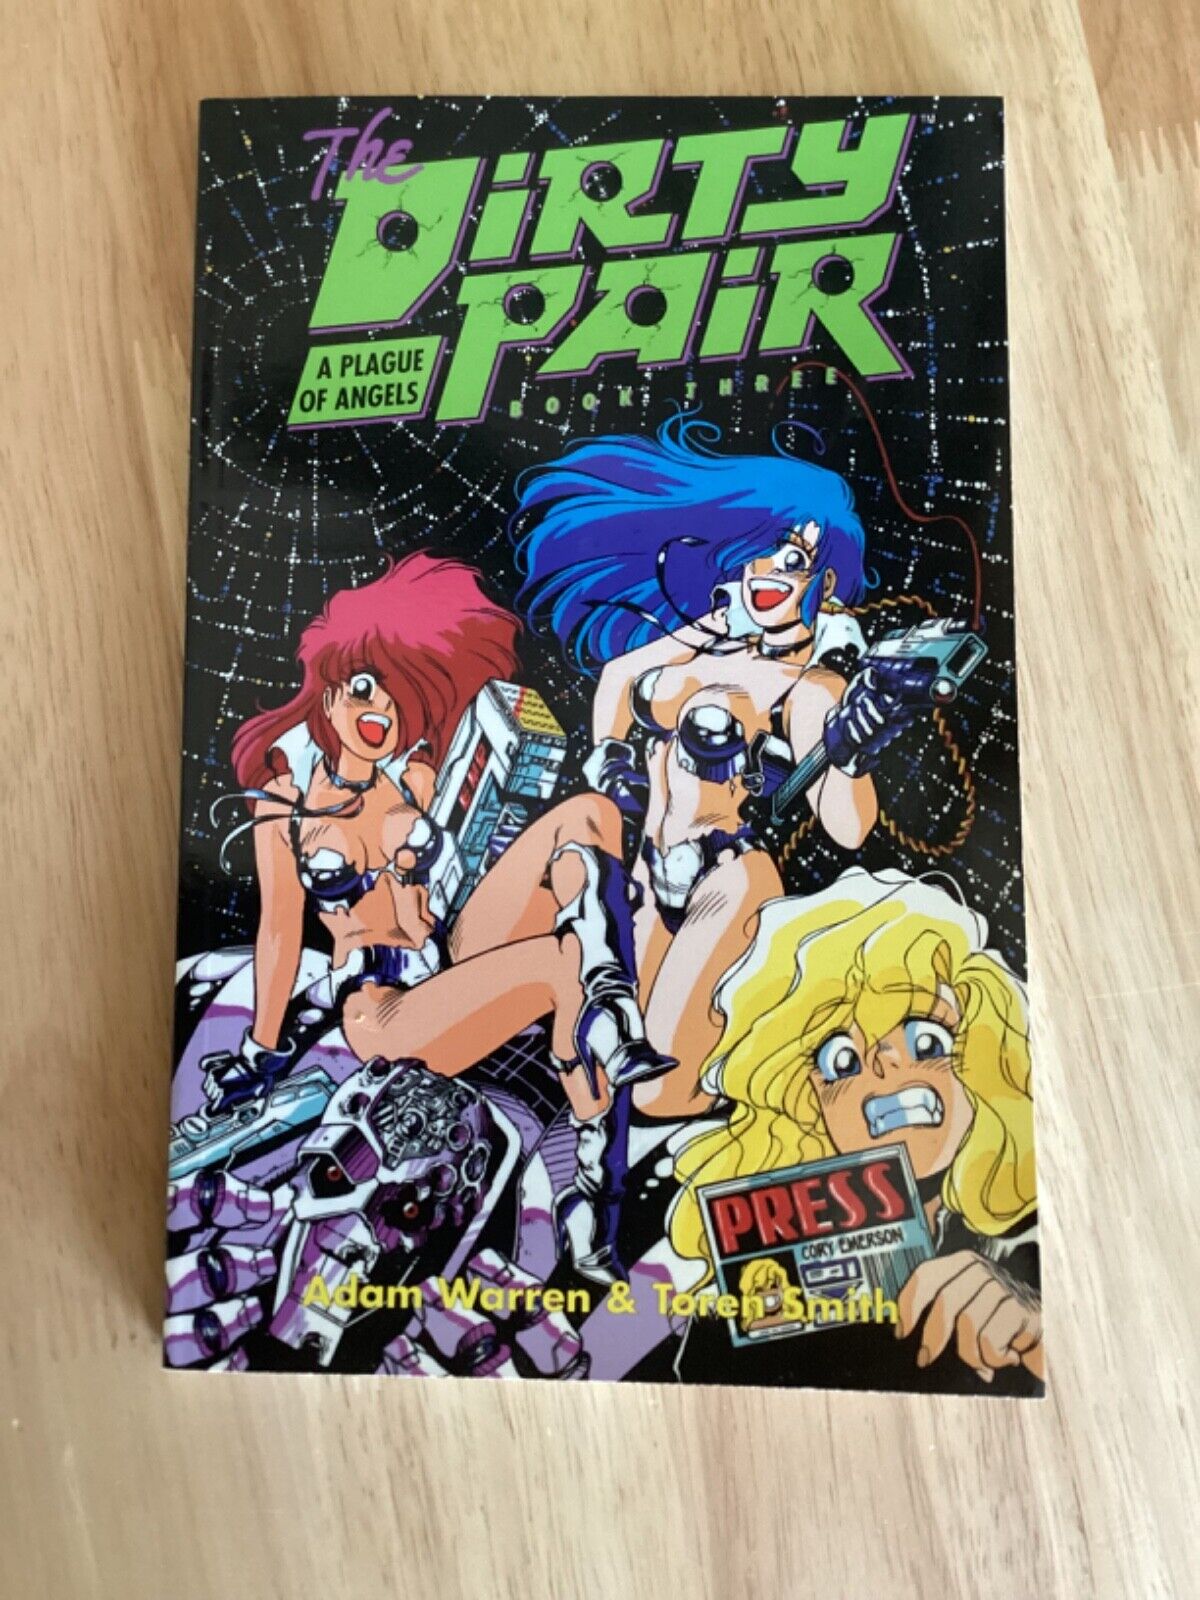 The Dirty Pair Book 3: A Plague of Angels TPB very good condition 